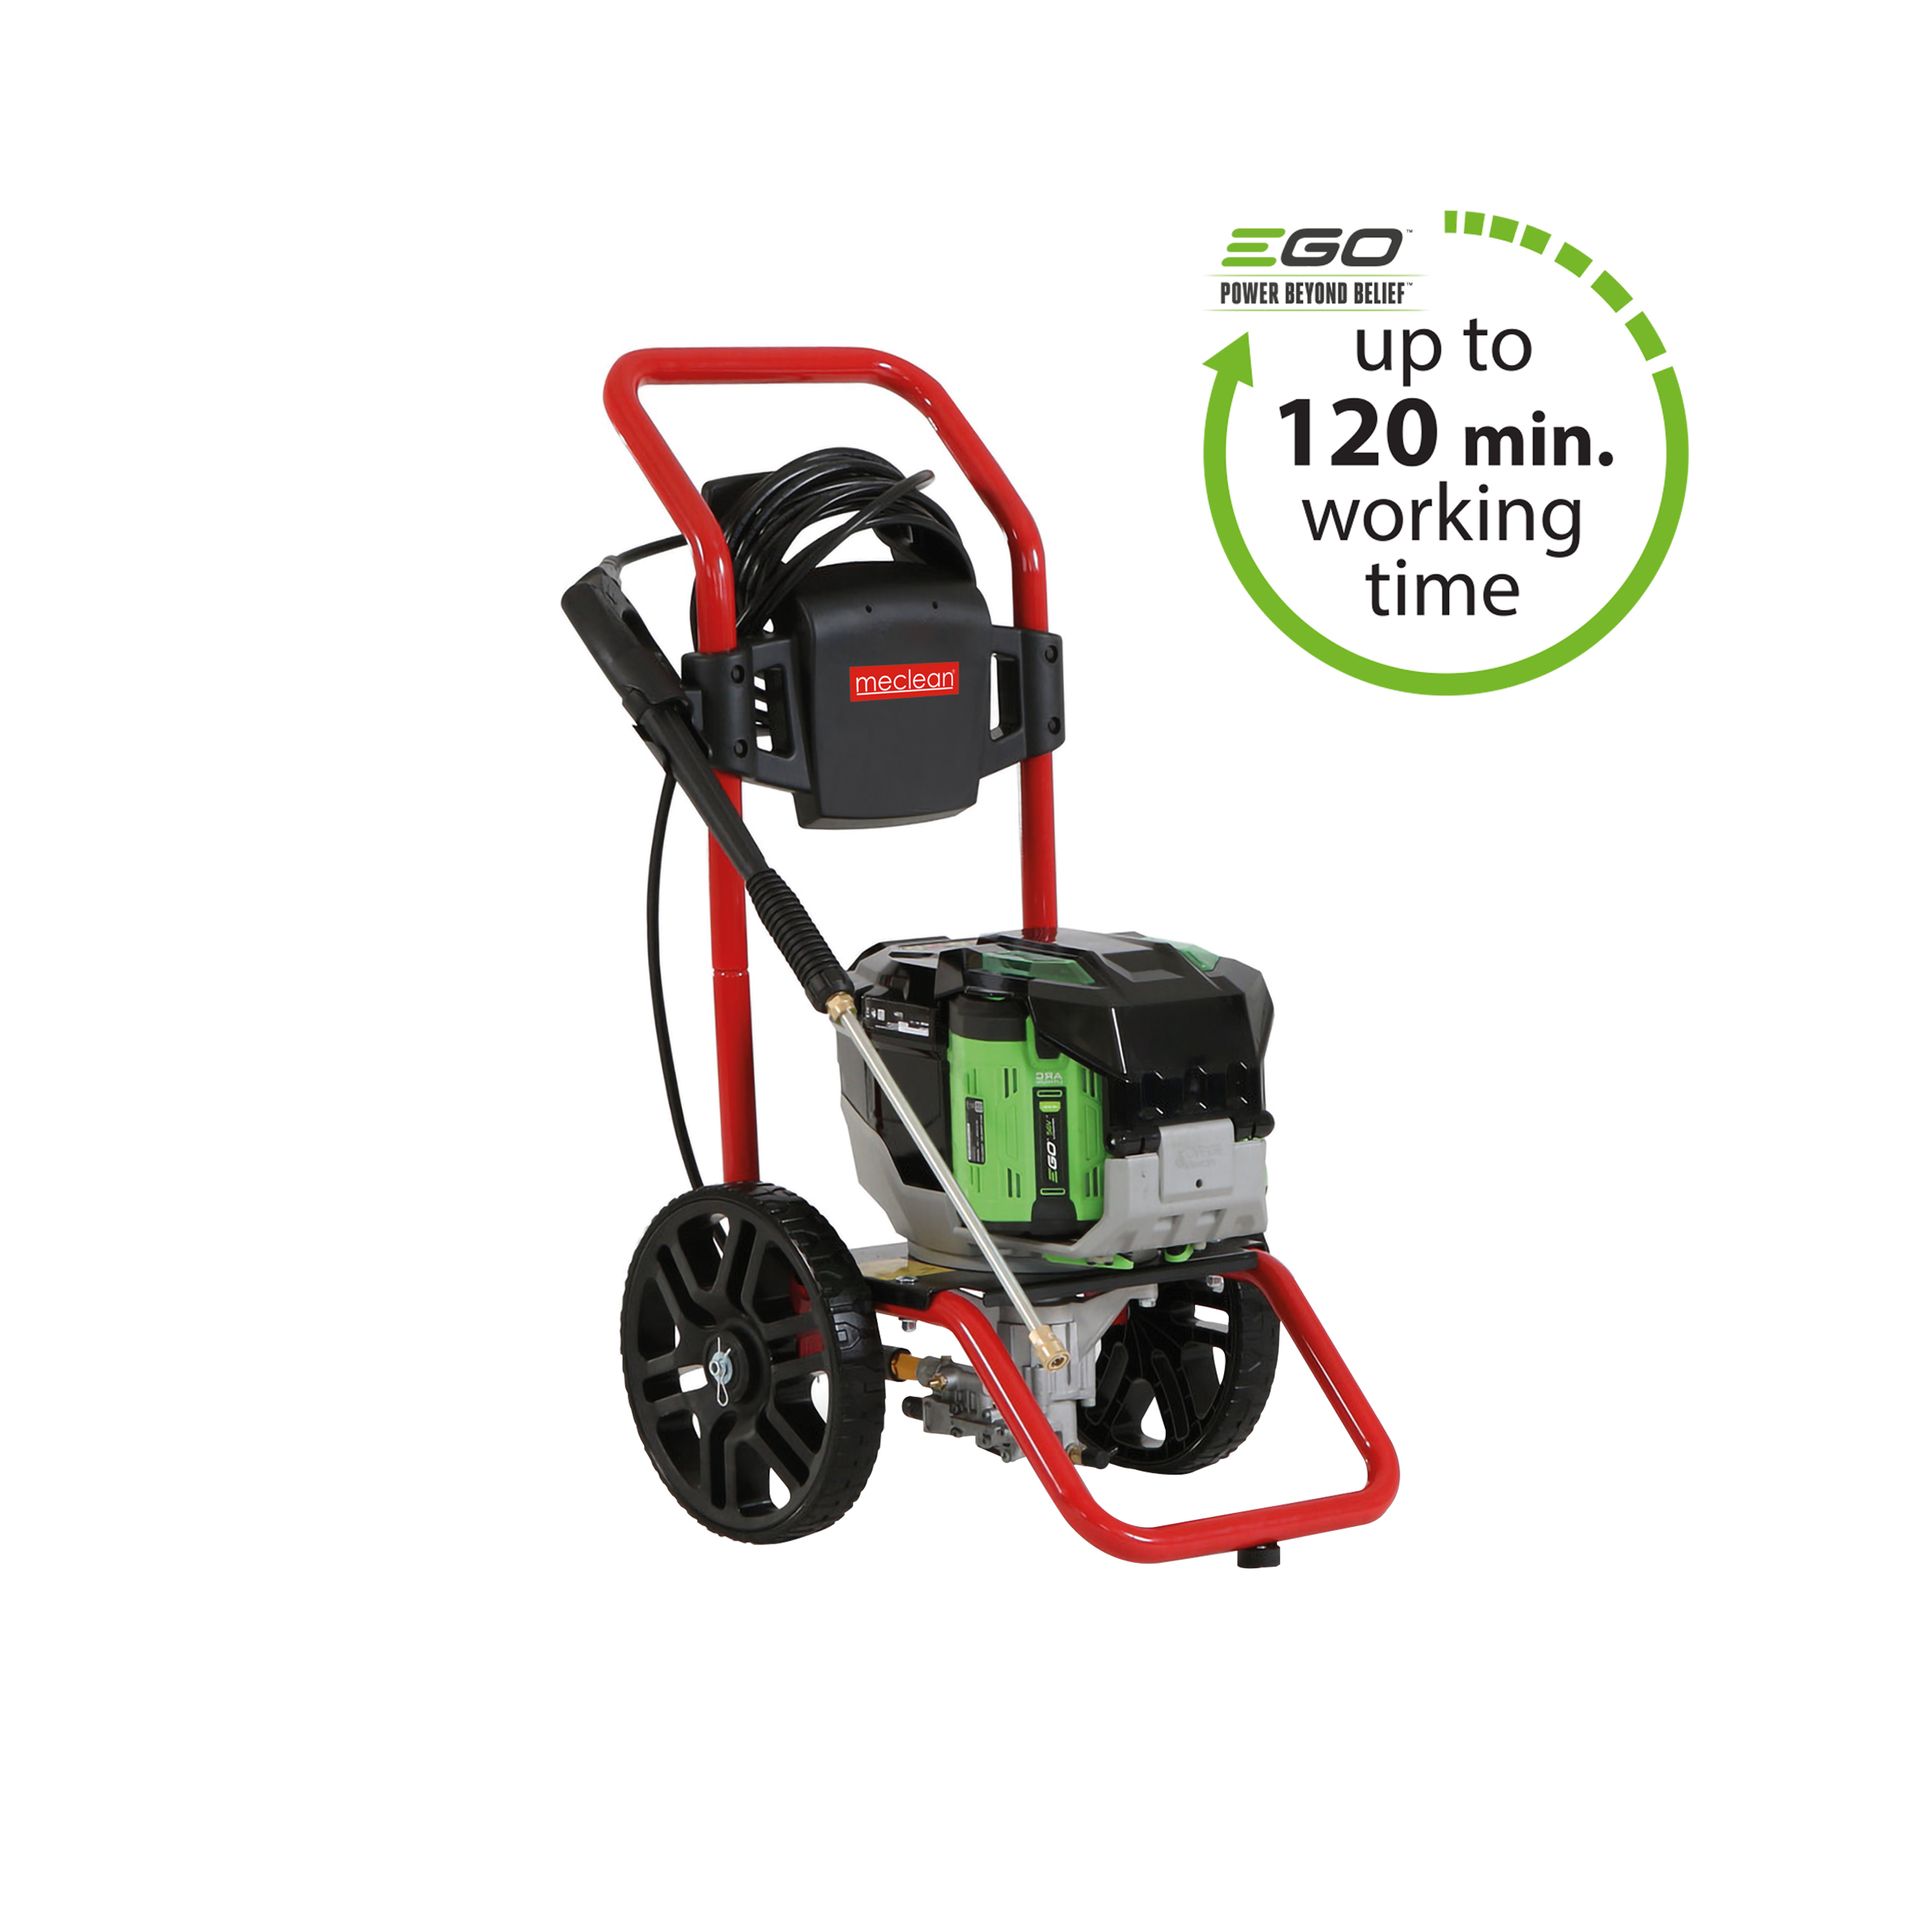 Meclean professional cold water high pressure washer E-GOJET 170/8